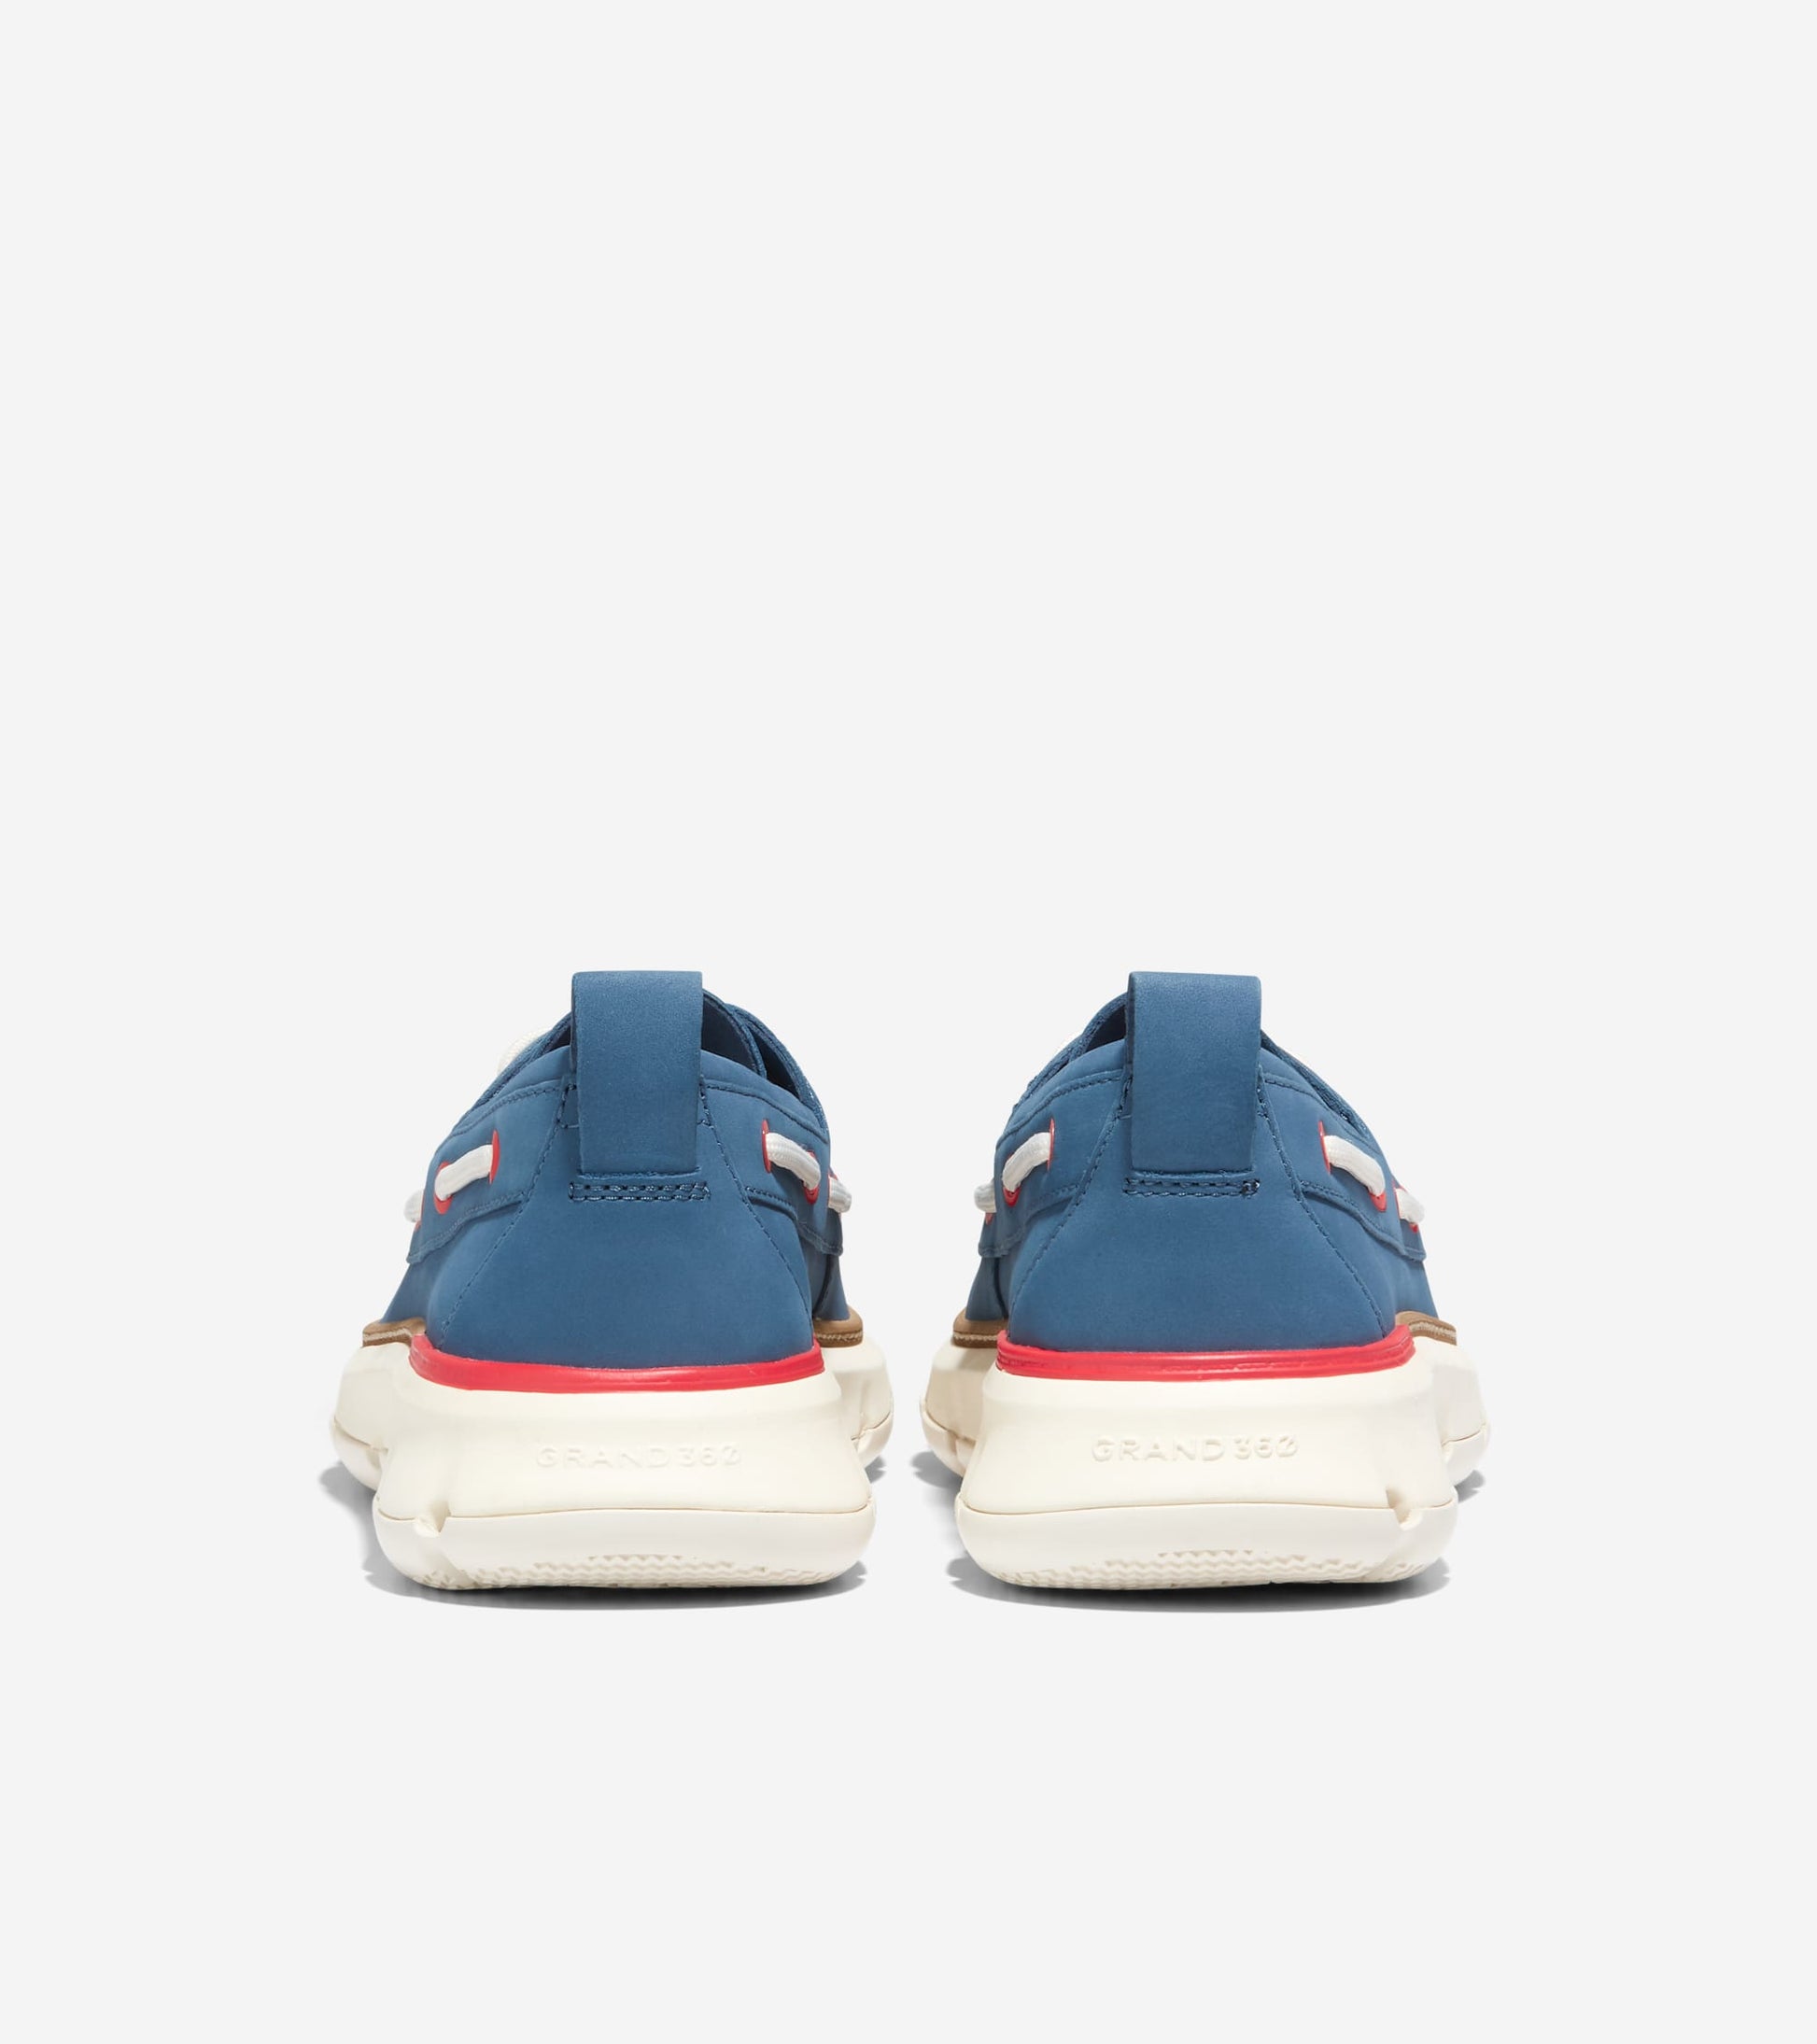 W28991:ENSIGN BLUE/FIERY RED/IVORY (8086472130807)